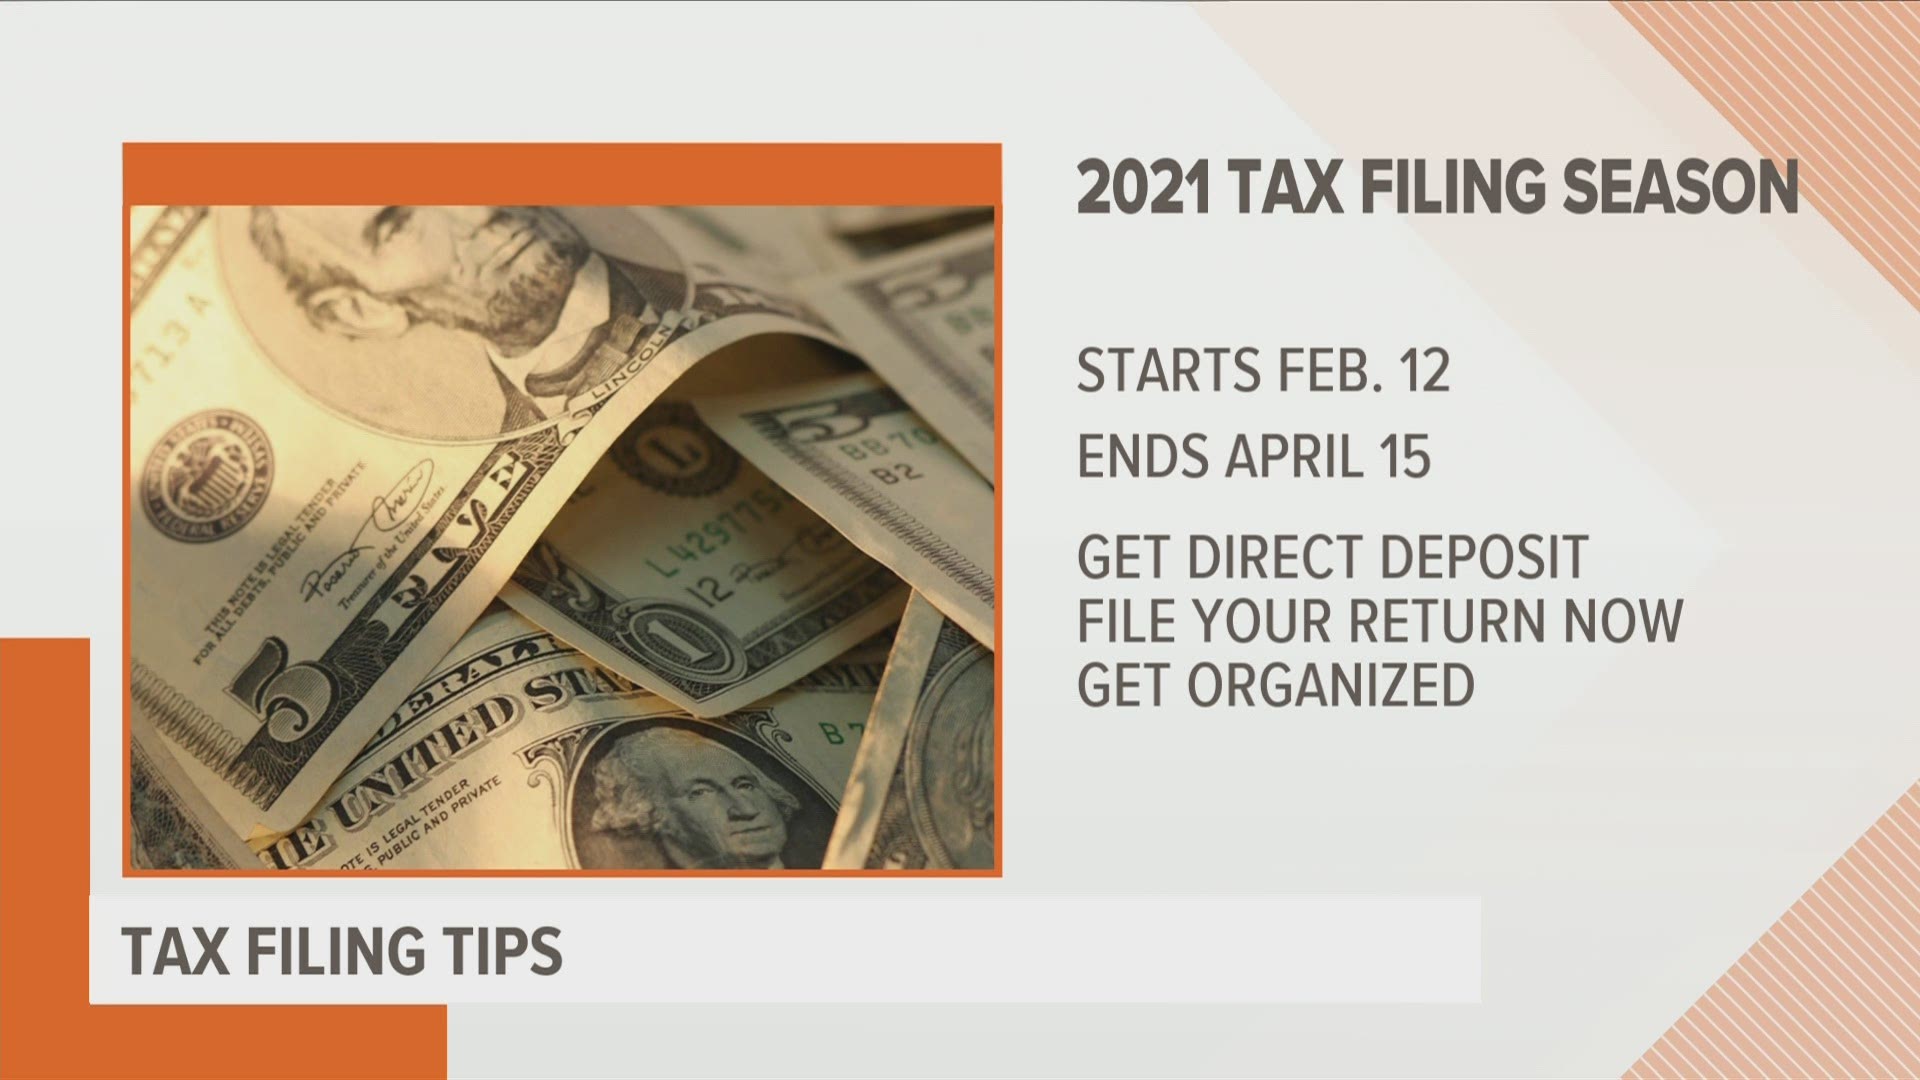 The IRS has pushed the start of tax filing season back by 2 weeks but there are steps you can take to get your returns sooner